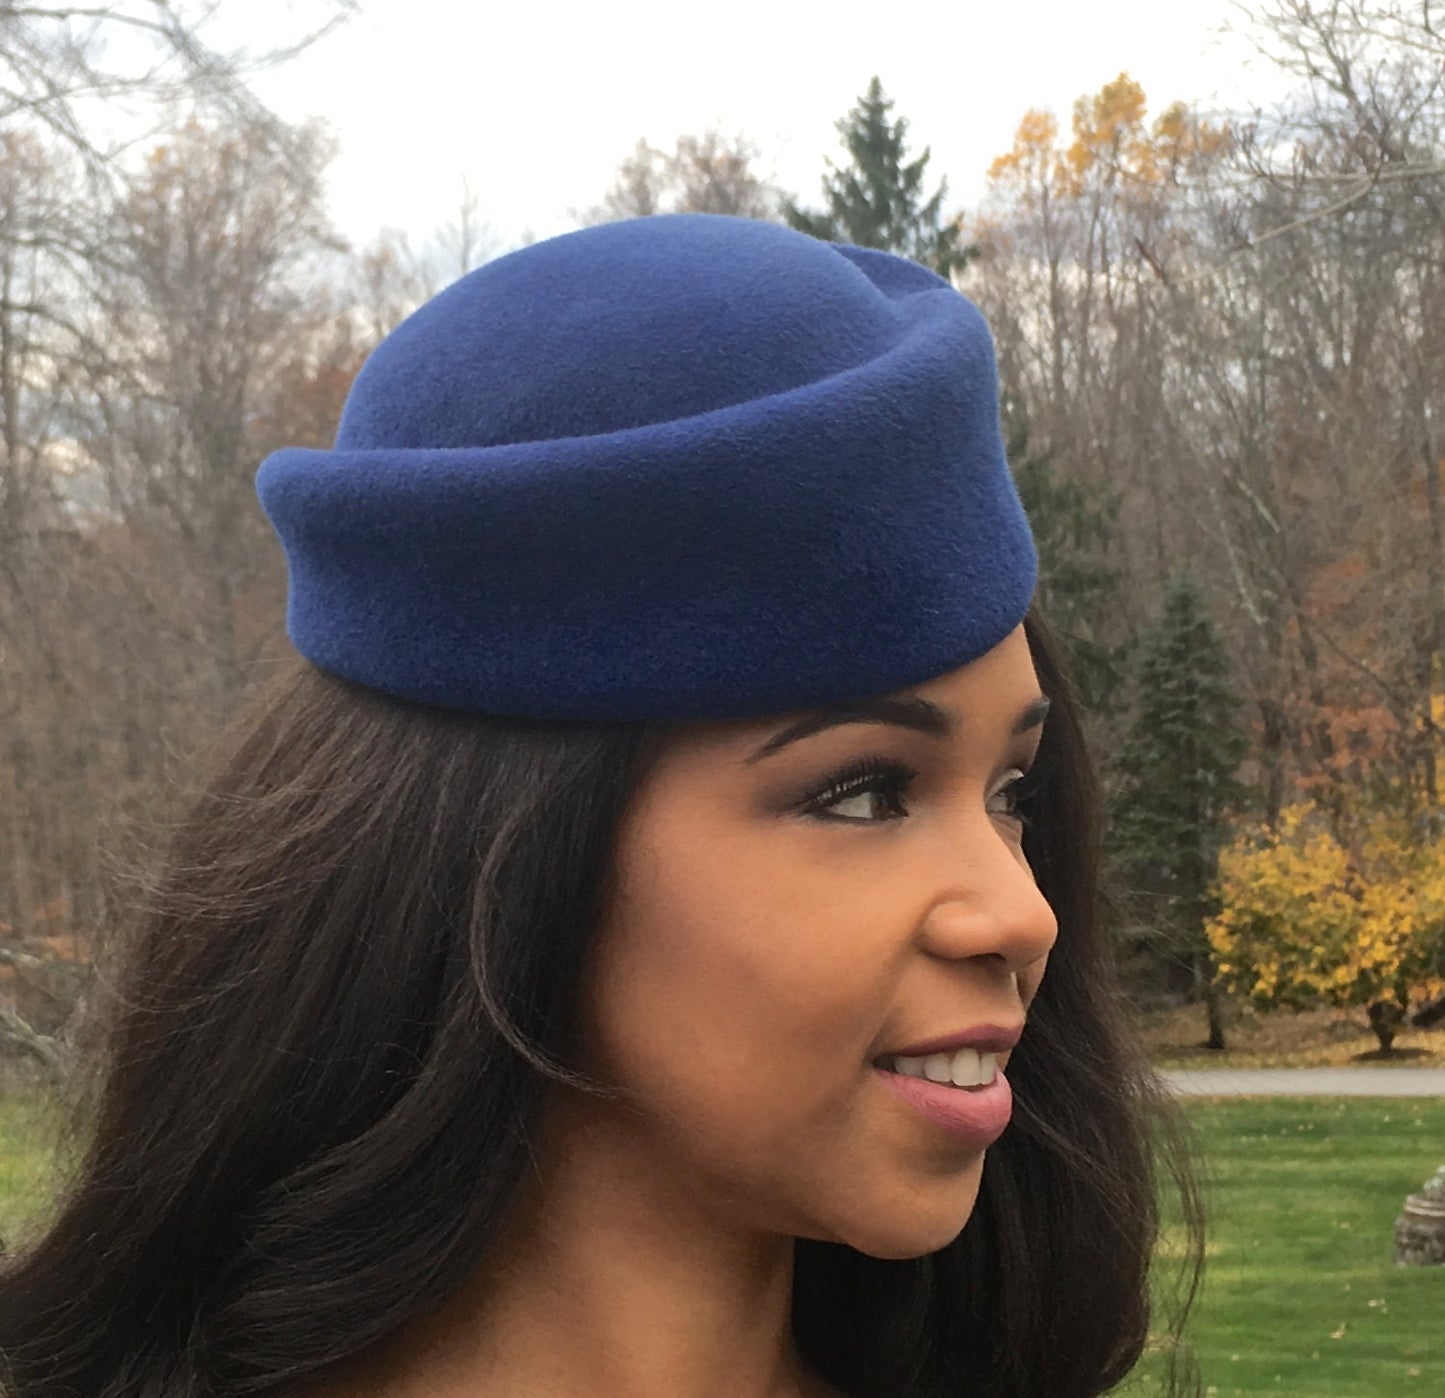 Royal Blue Wool Felt Pillbox Hat! Vintage Style and Timeless. Church hat-Winter Races-Polo-Derby-Wedding-Mother of the Bride-Bridesmaids Hat